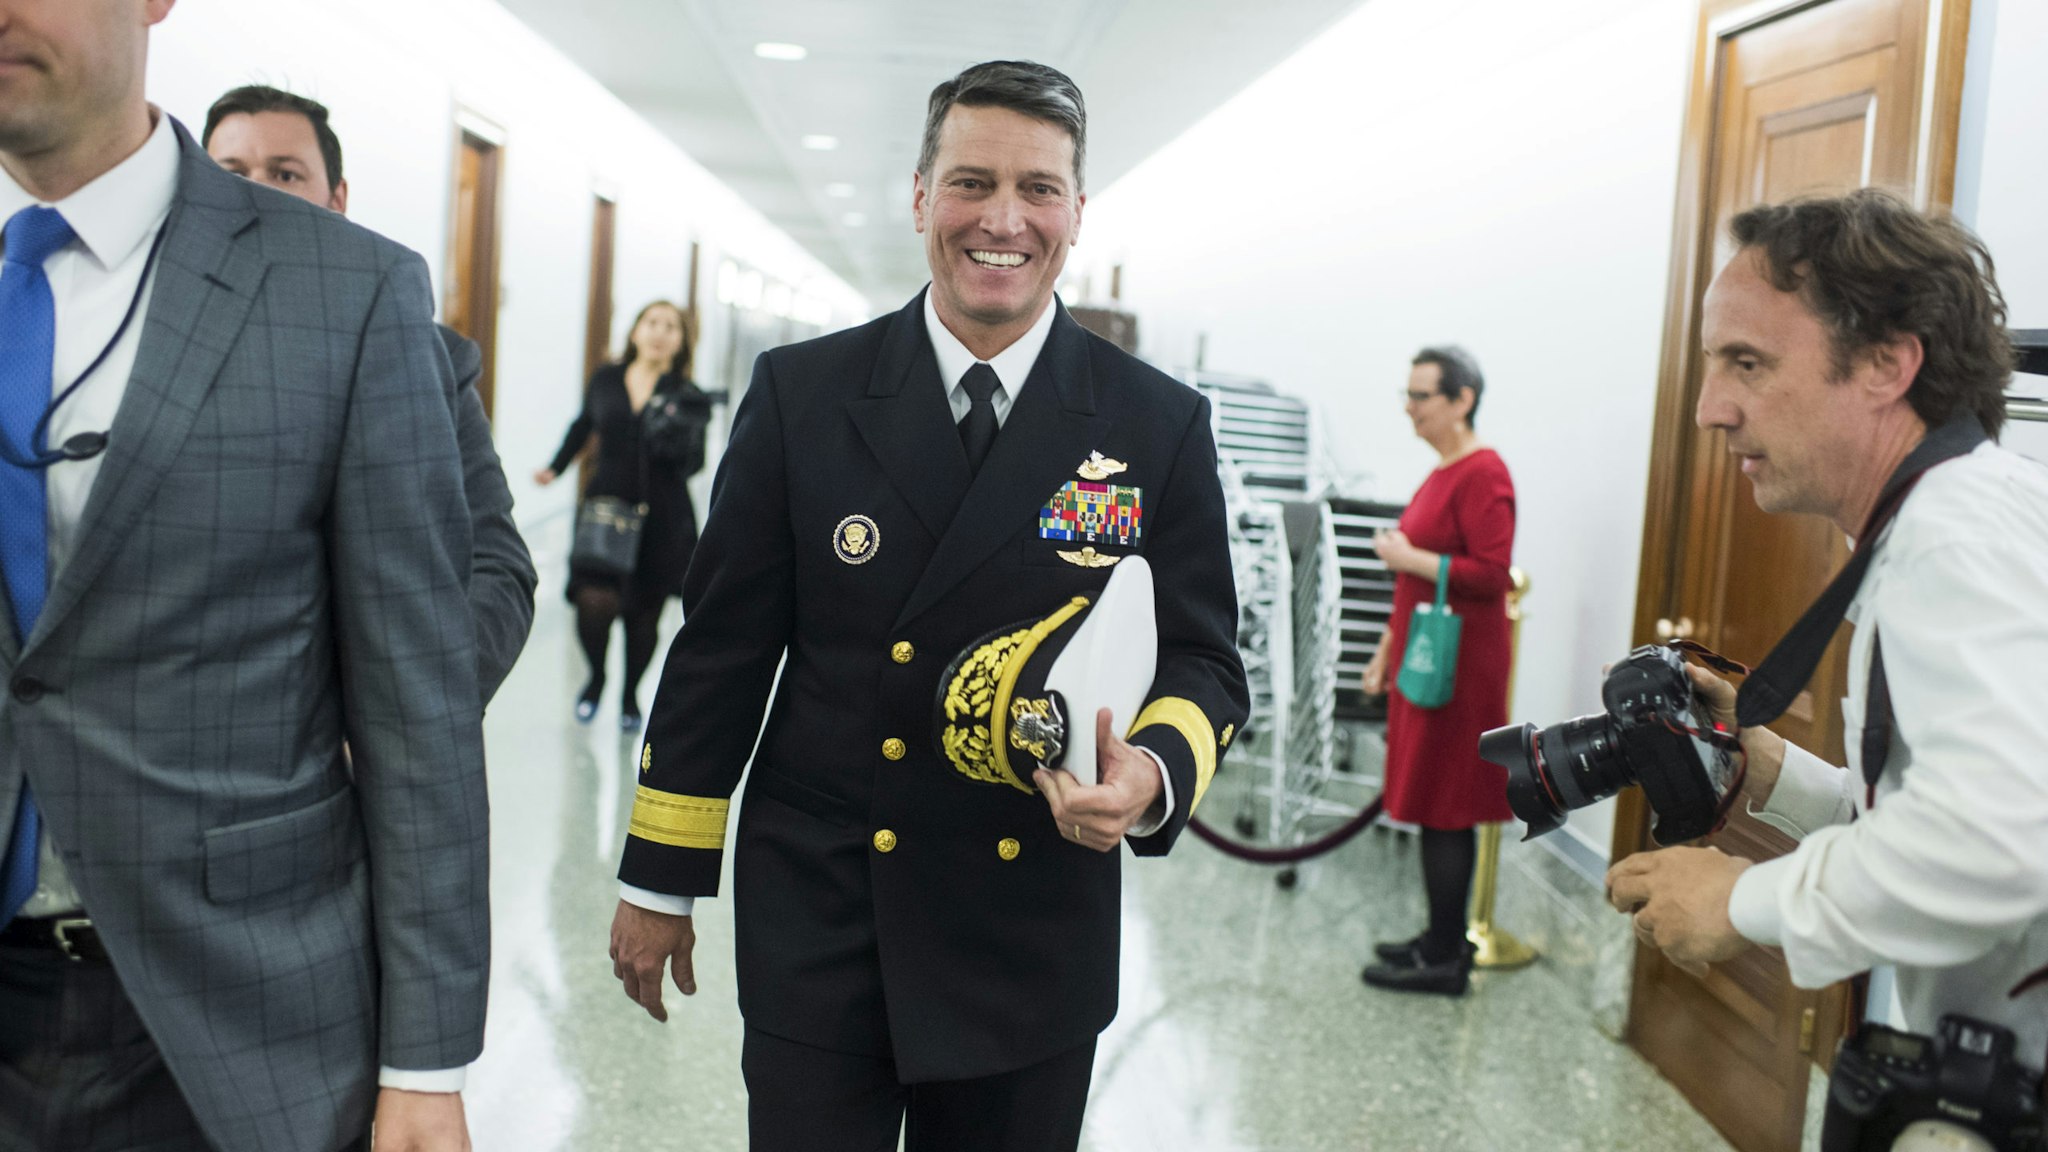 UNITED STATES - APRIL 24: Rear Adm. Ronny Jackson, nominee for Veterans Affairs secretary, leaves Dirksen Building after a meeting on Capitol Hill with Sen. Jerry Moran, R-Kan., on April 24, 2018.